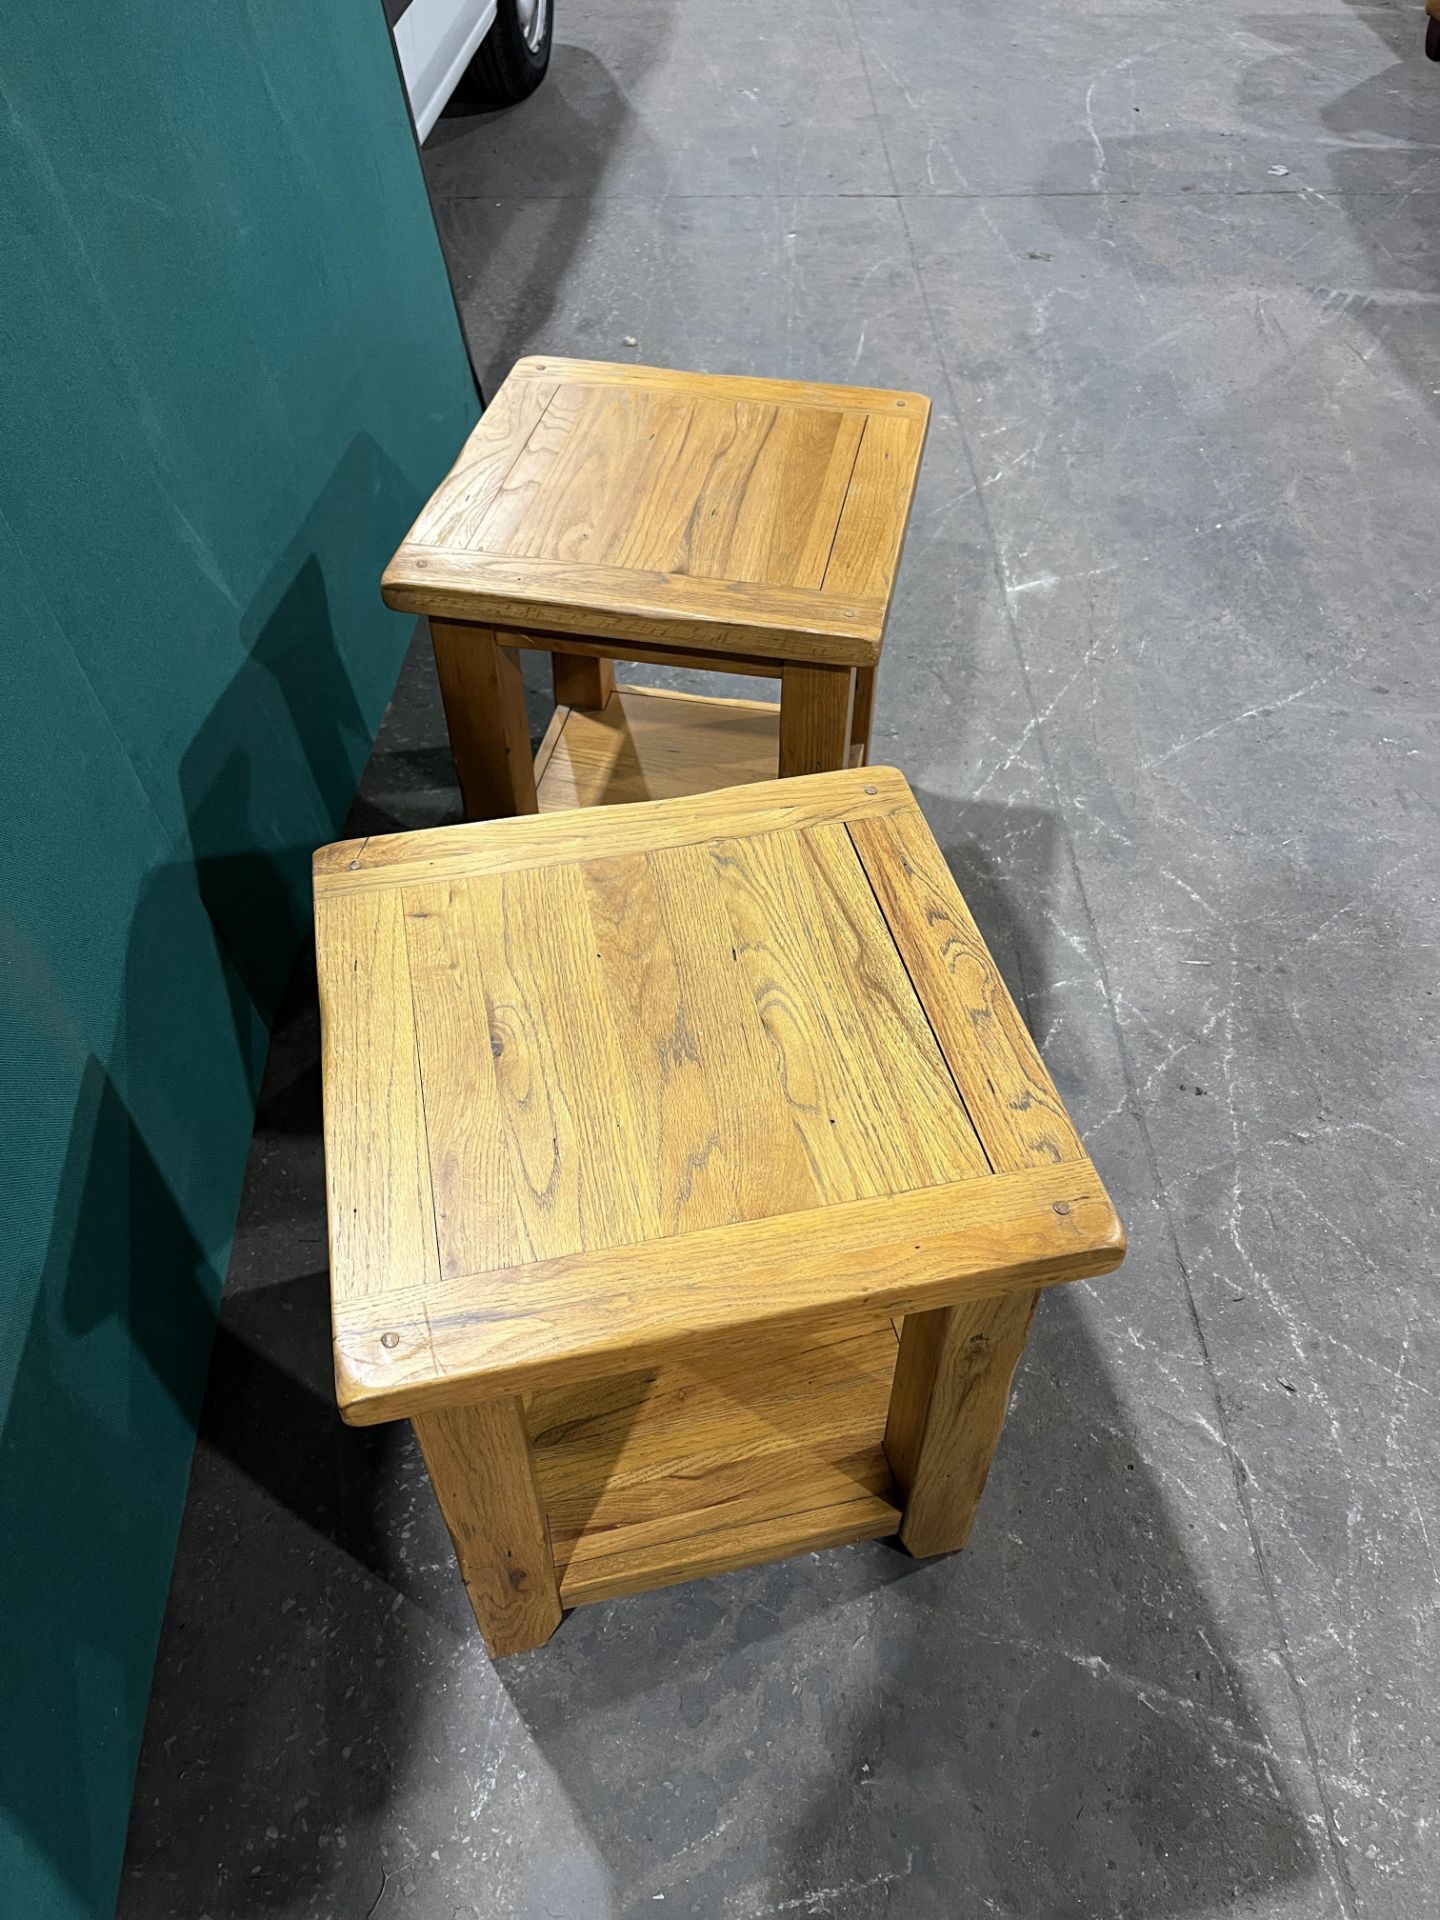 2 x Square Side Tables - Image 5 of 5